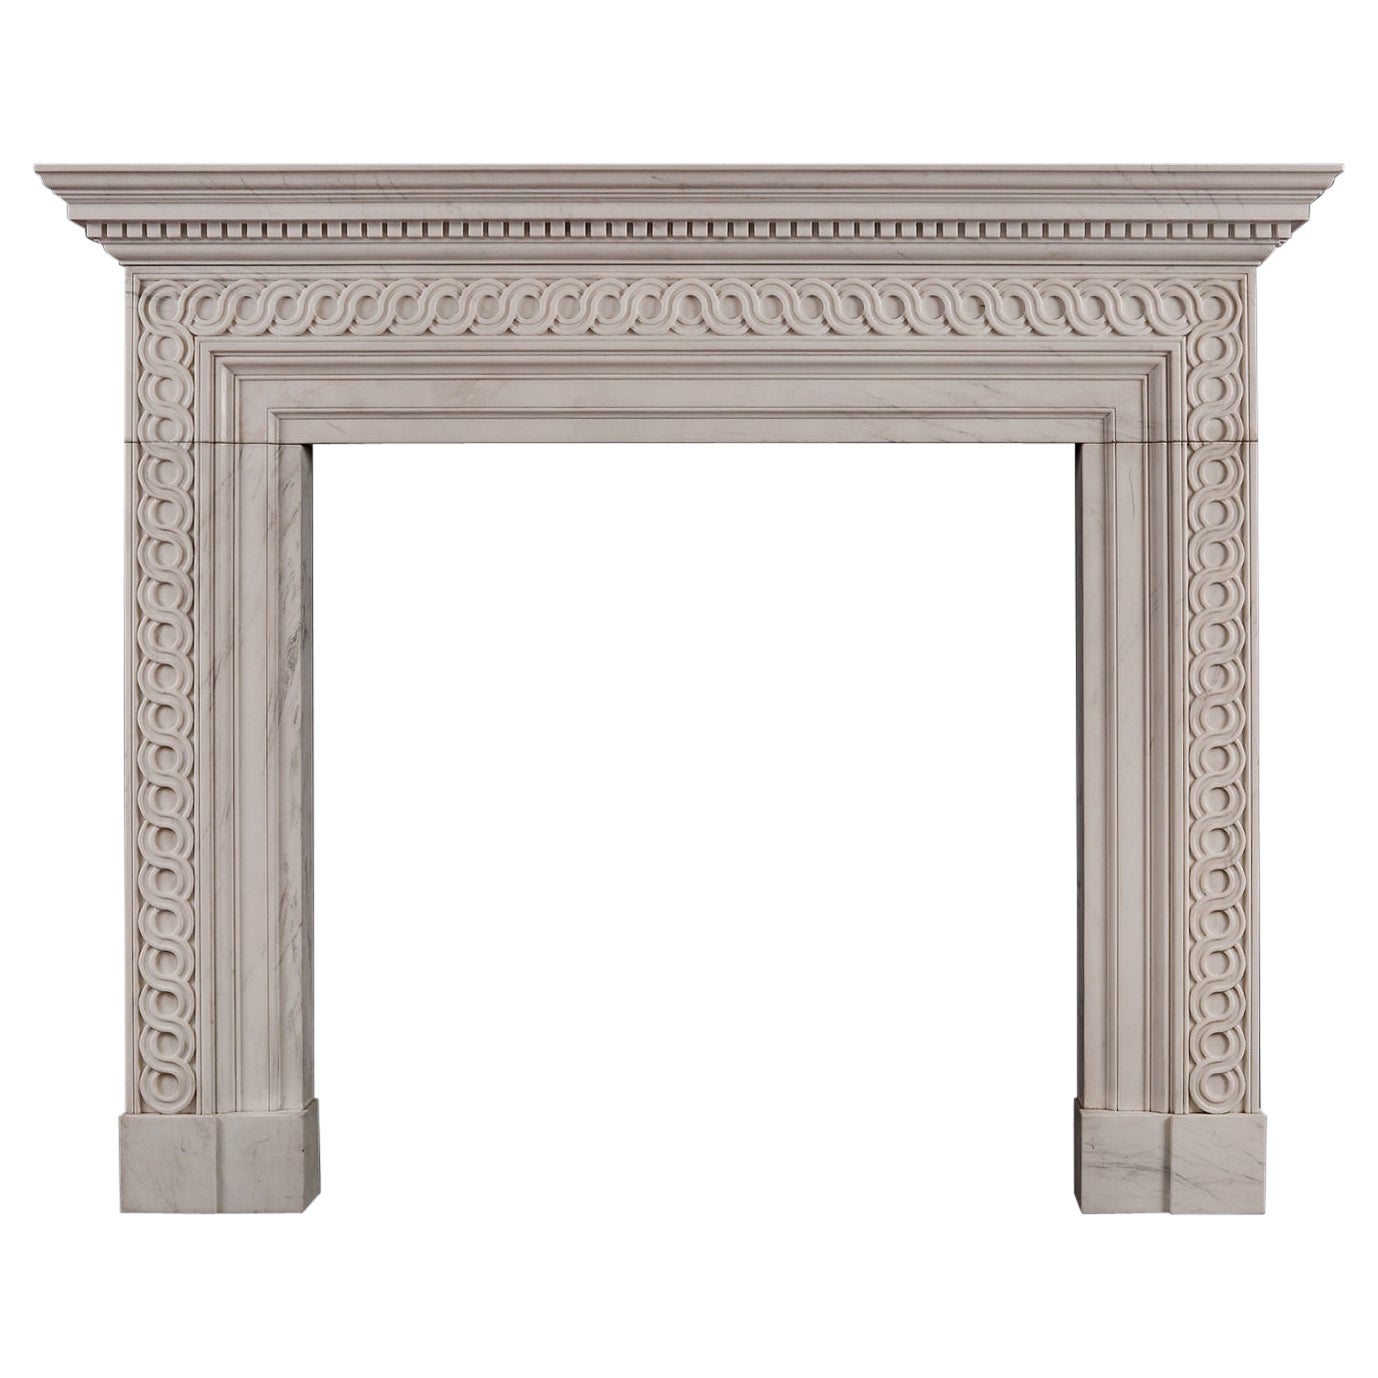 English White Marble Fireplace For Sale